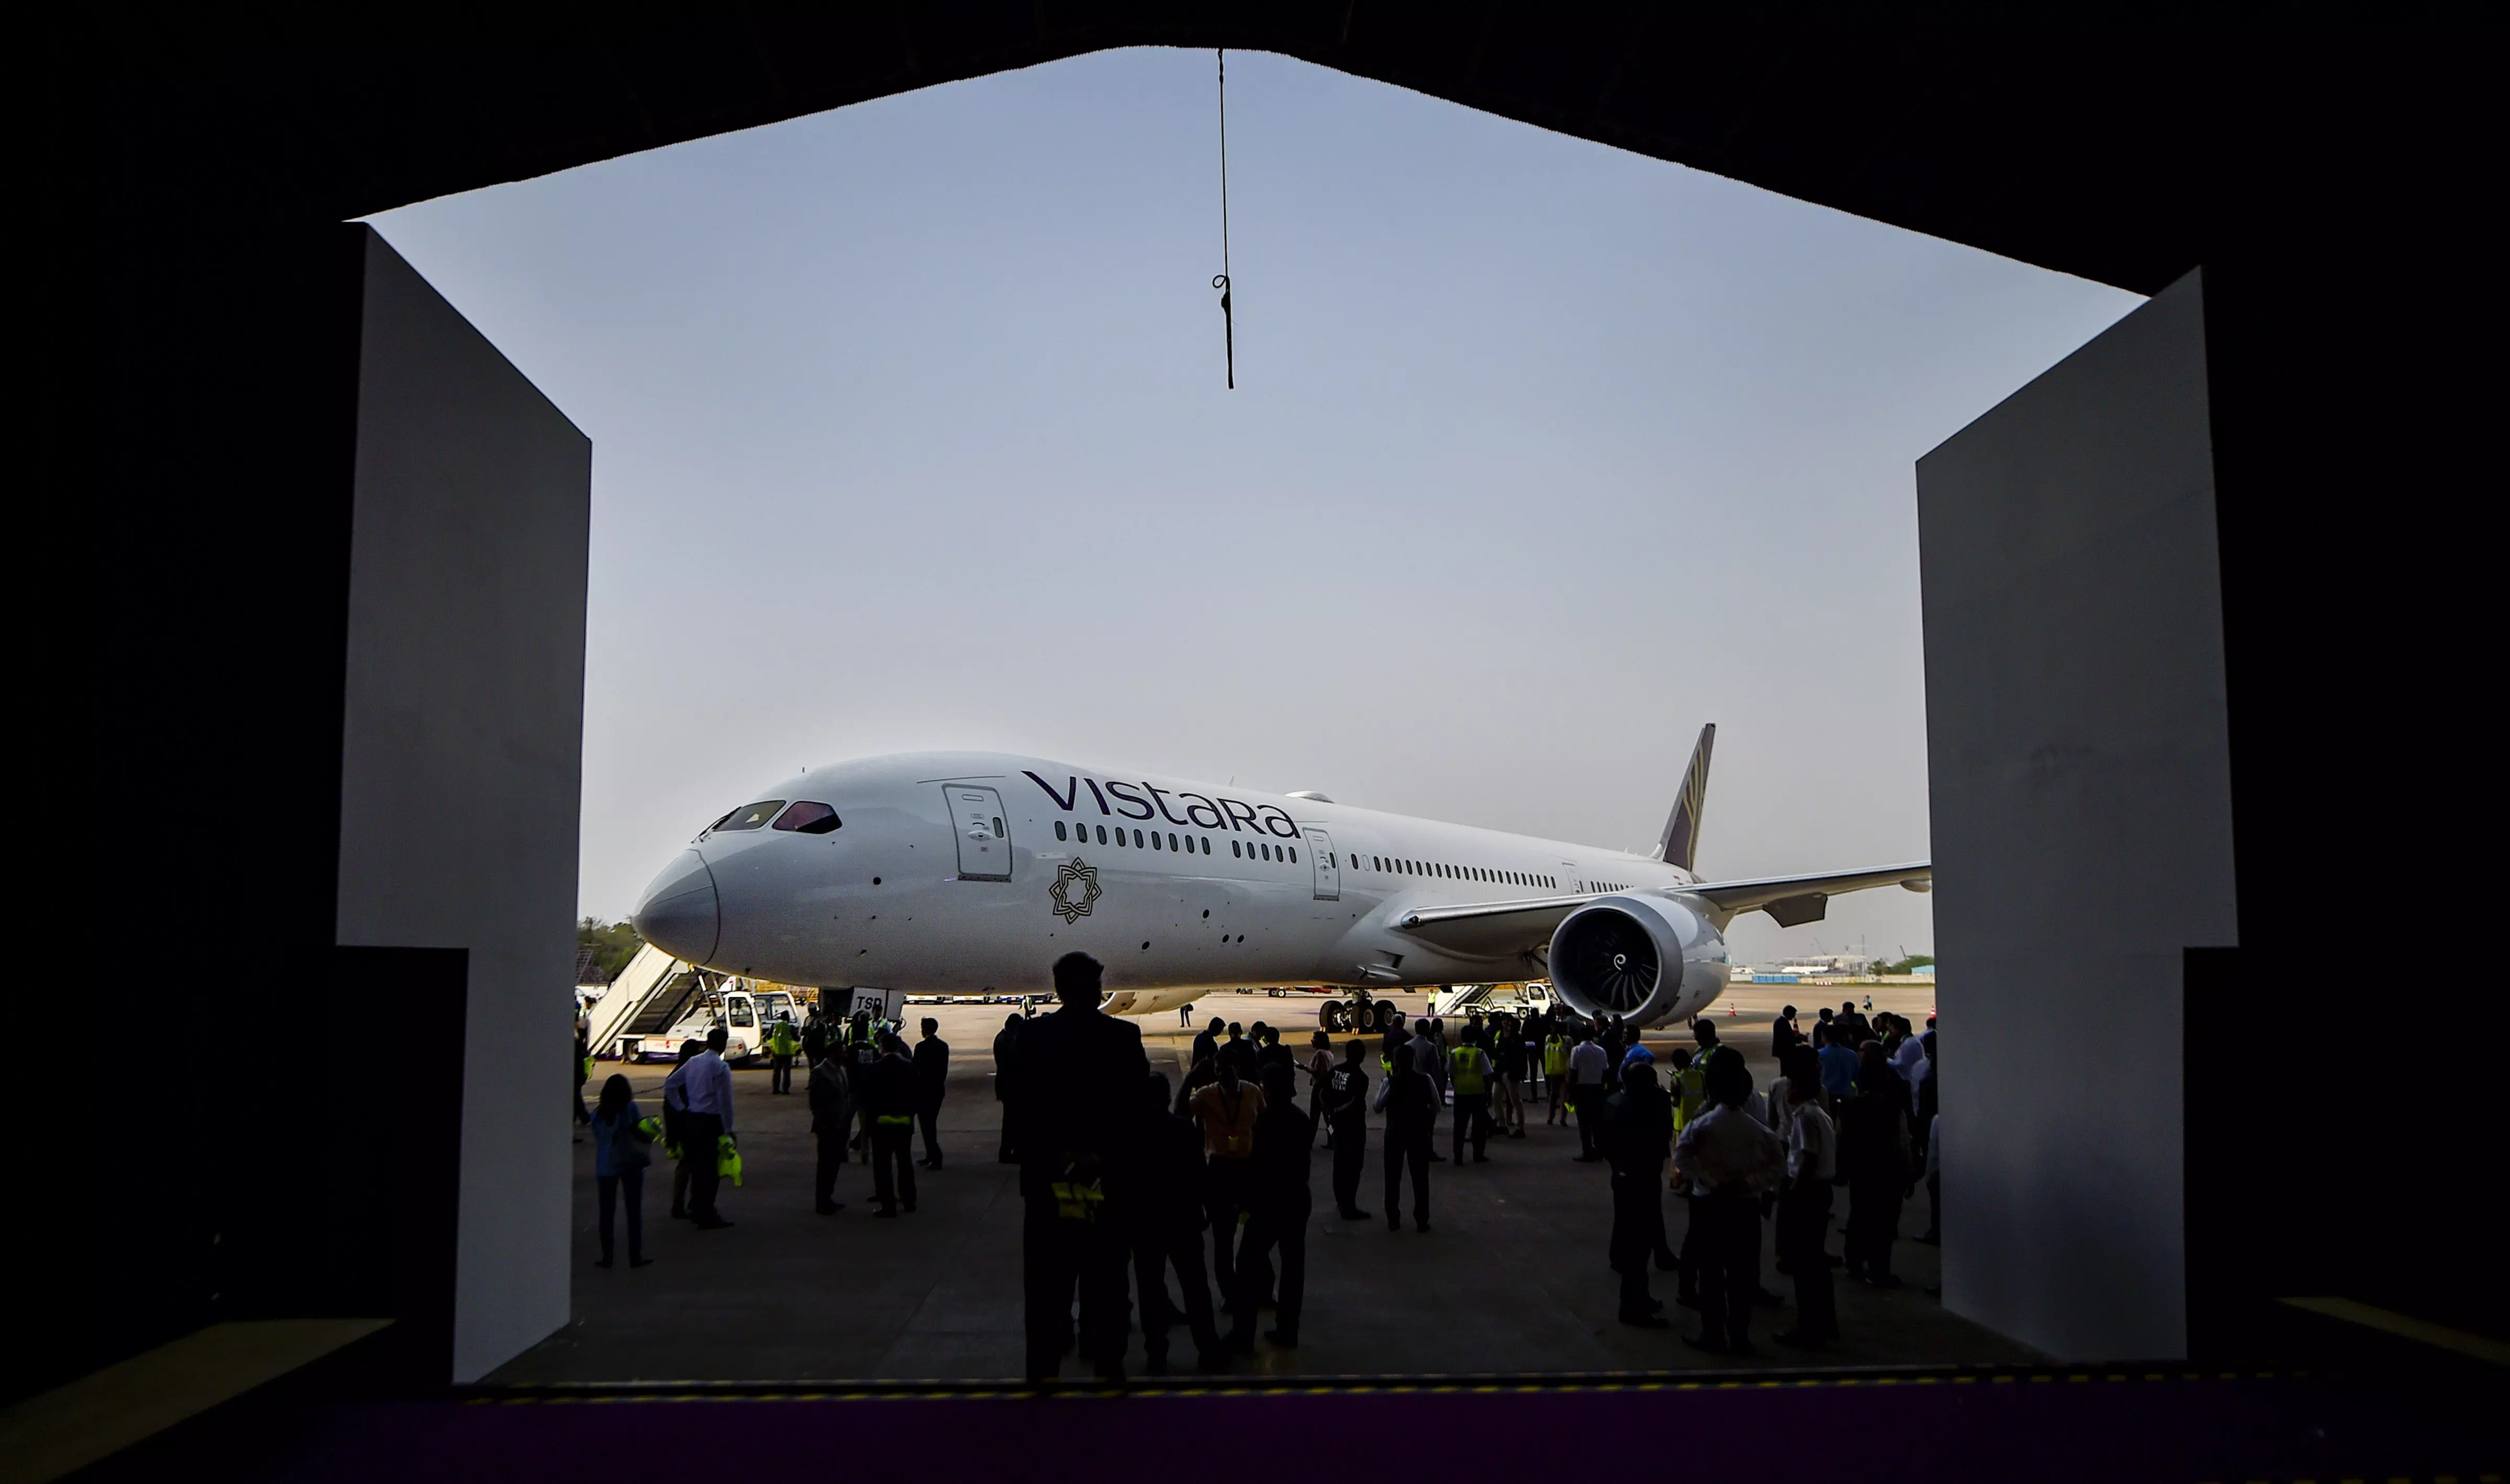 Vistara to discuss rostering system with pilots: CEO